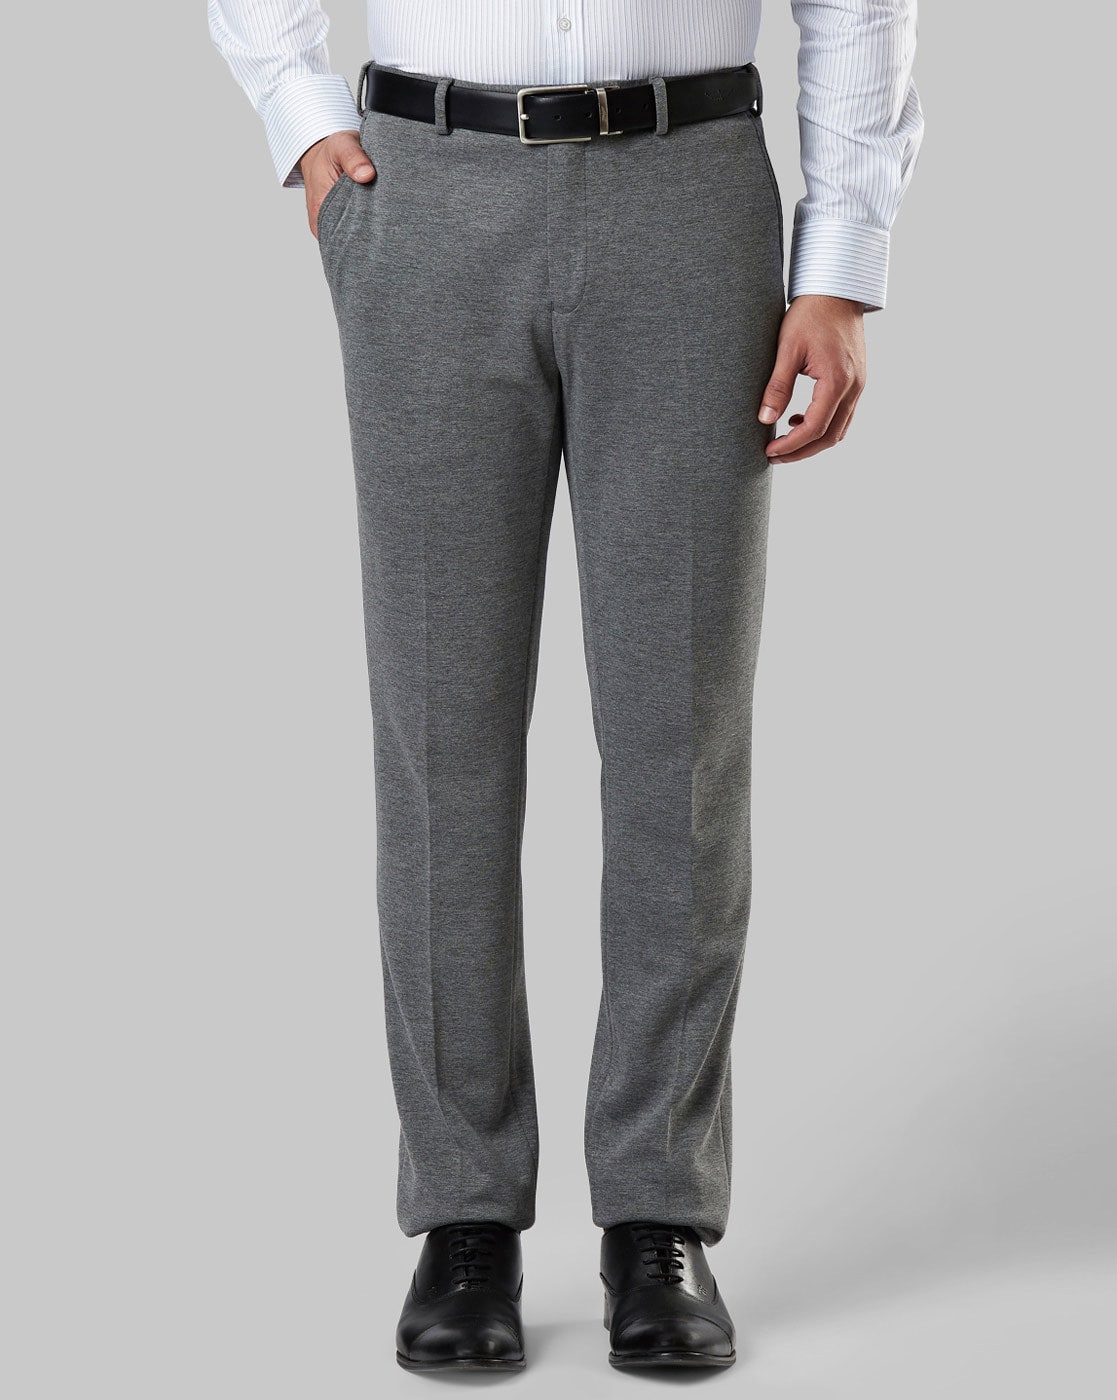 Solid Raymond Black Viscose Rayon Trouser, Slim Fit, Size: 32(Waist Size)  at Rs 2099 in Bareilly